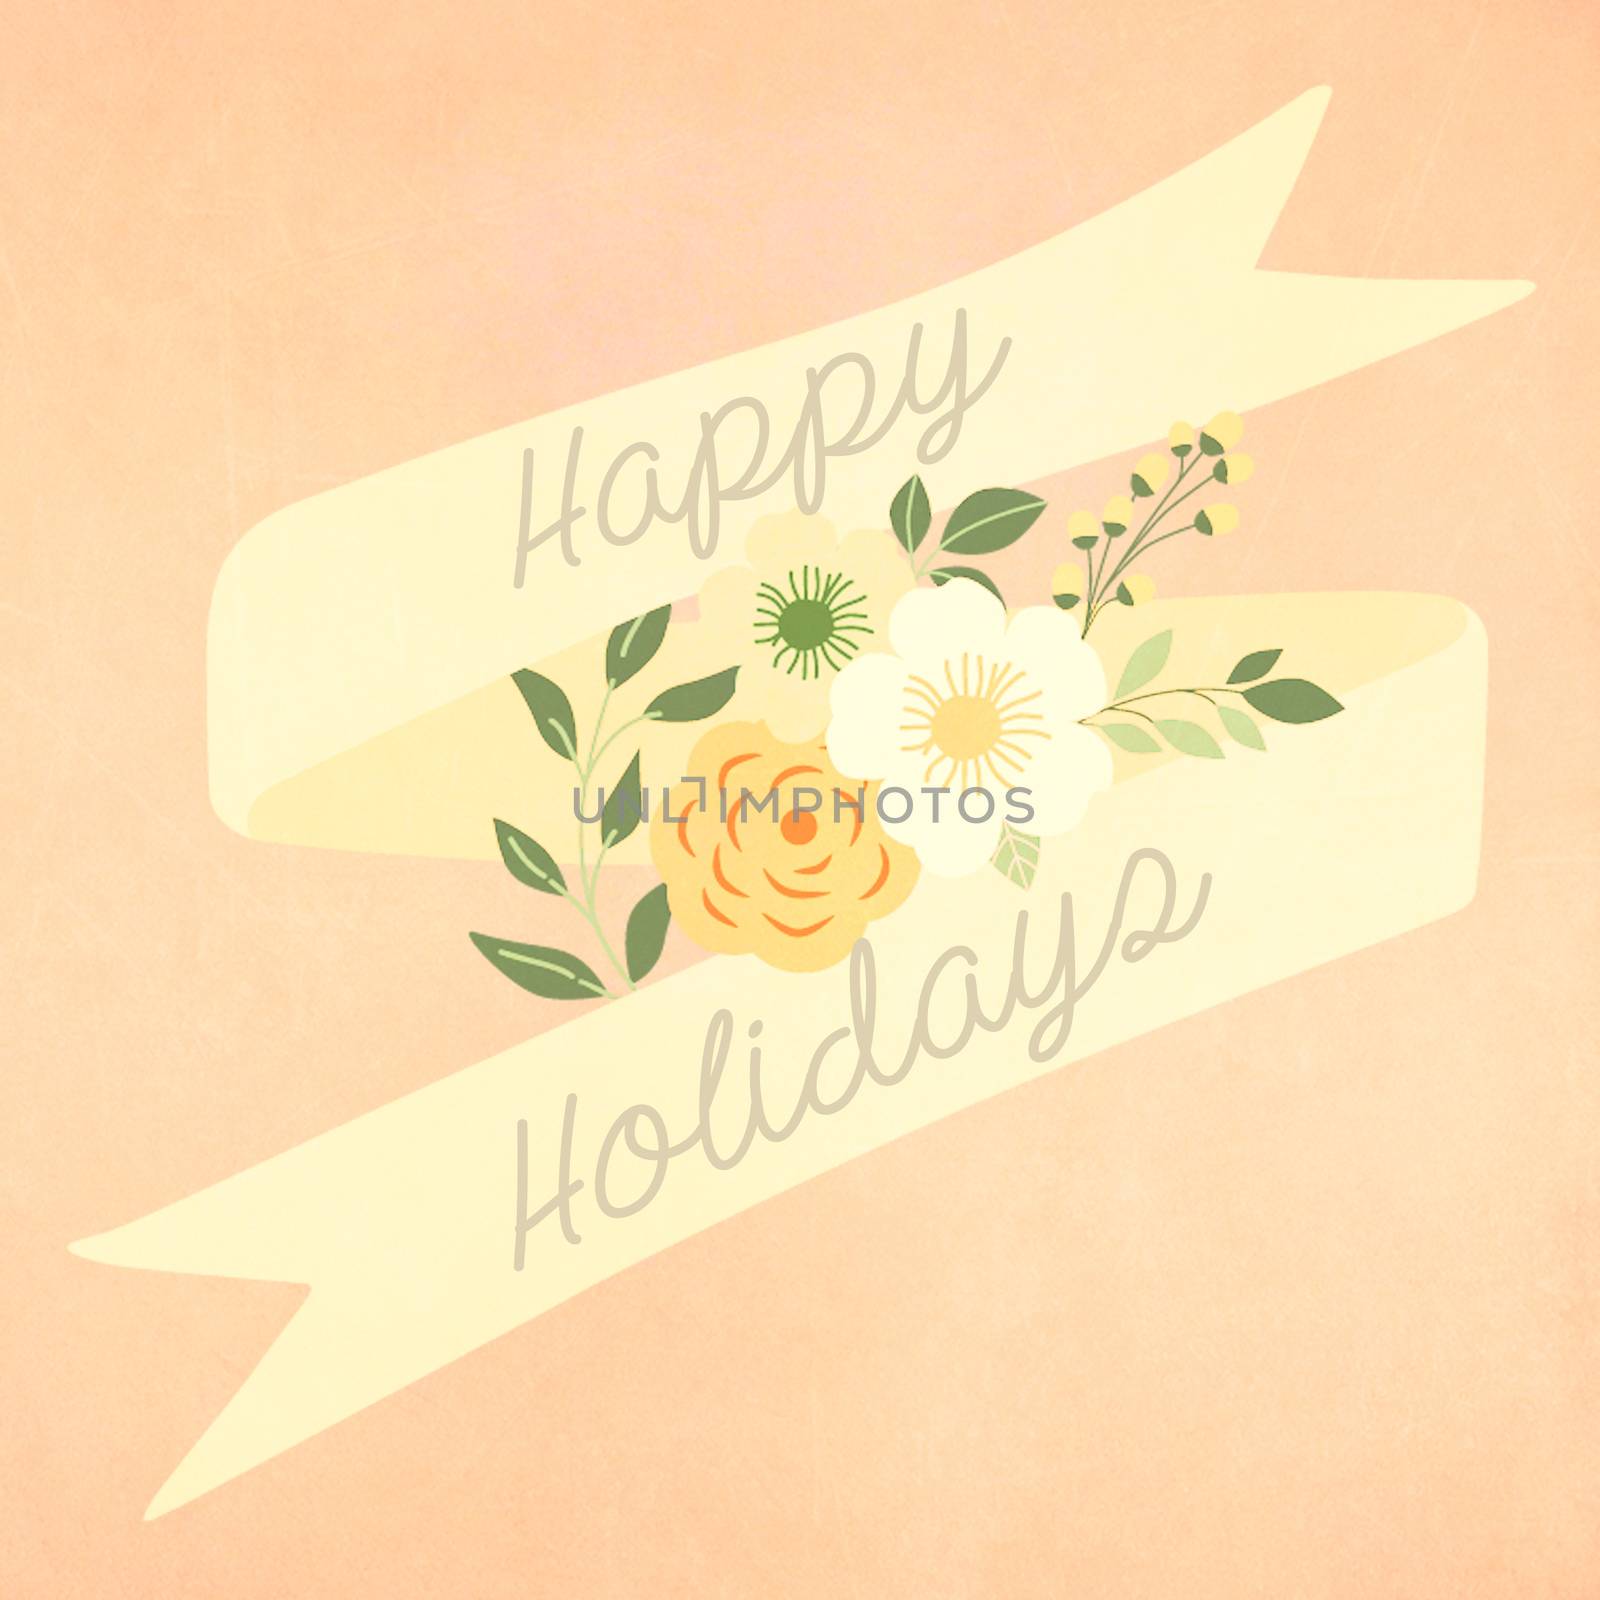 Happy holidays greeting card with retro vintage style by nuchylee